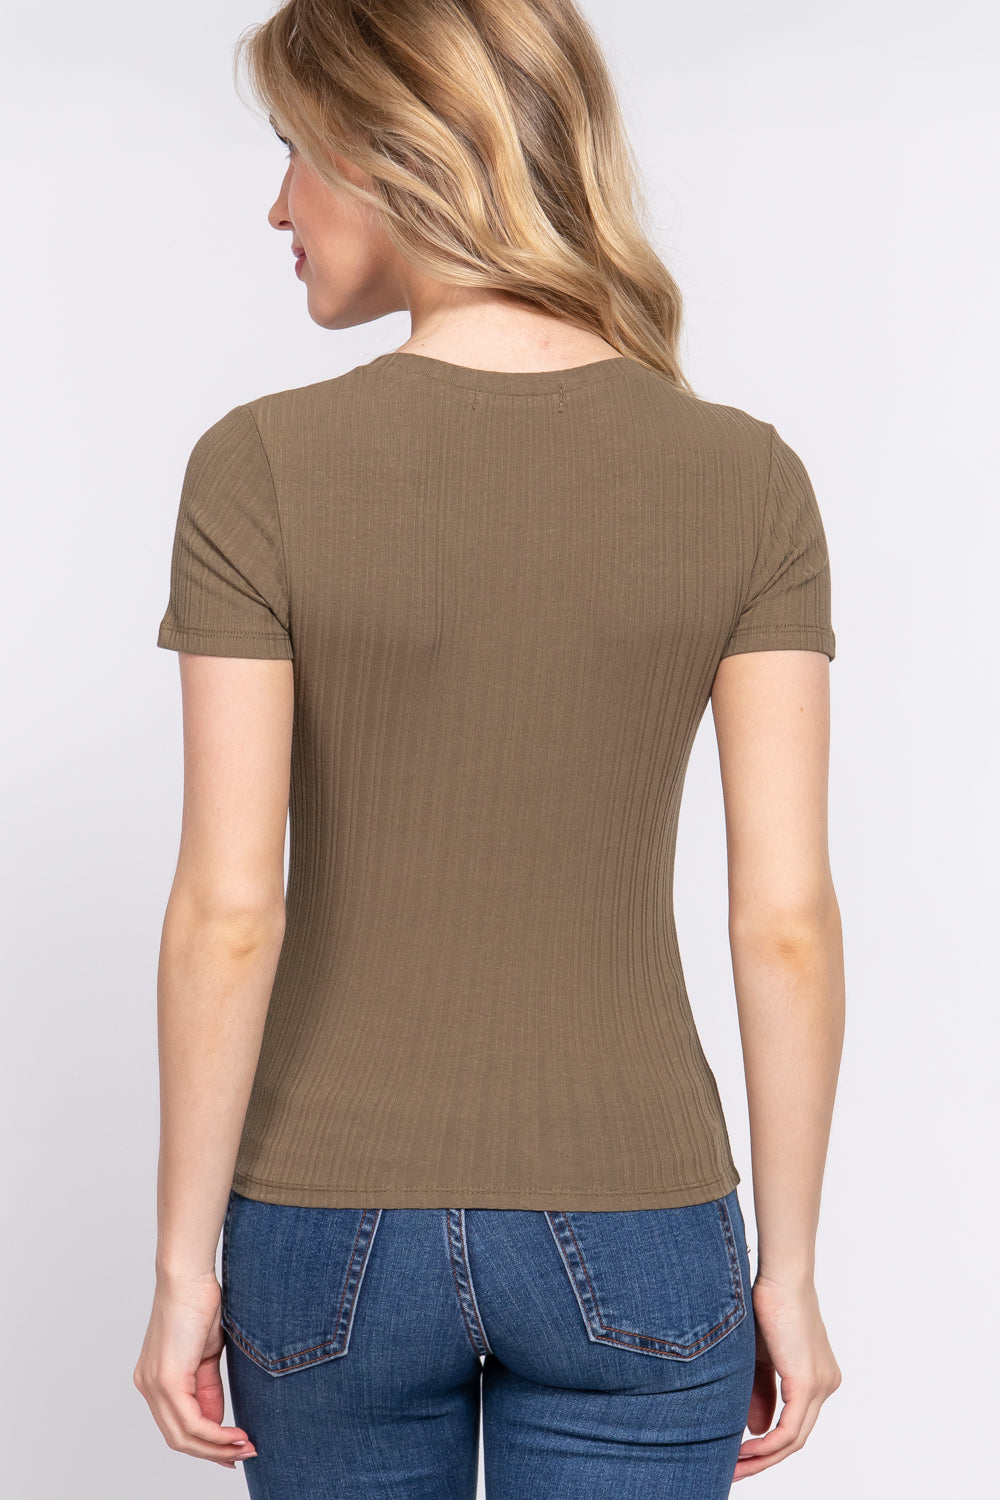 Olive Short Sleeve Crew Neck Variegated Rib Knit Top ccw